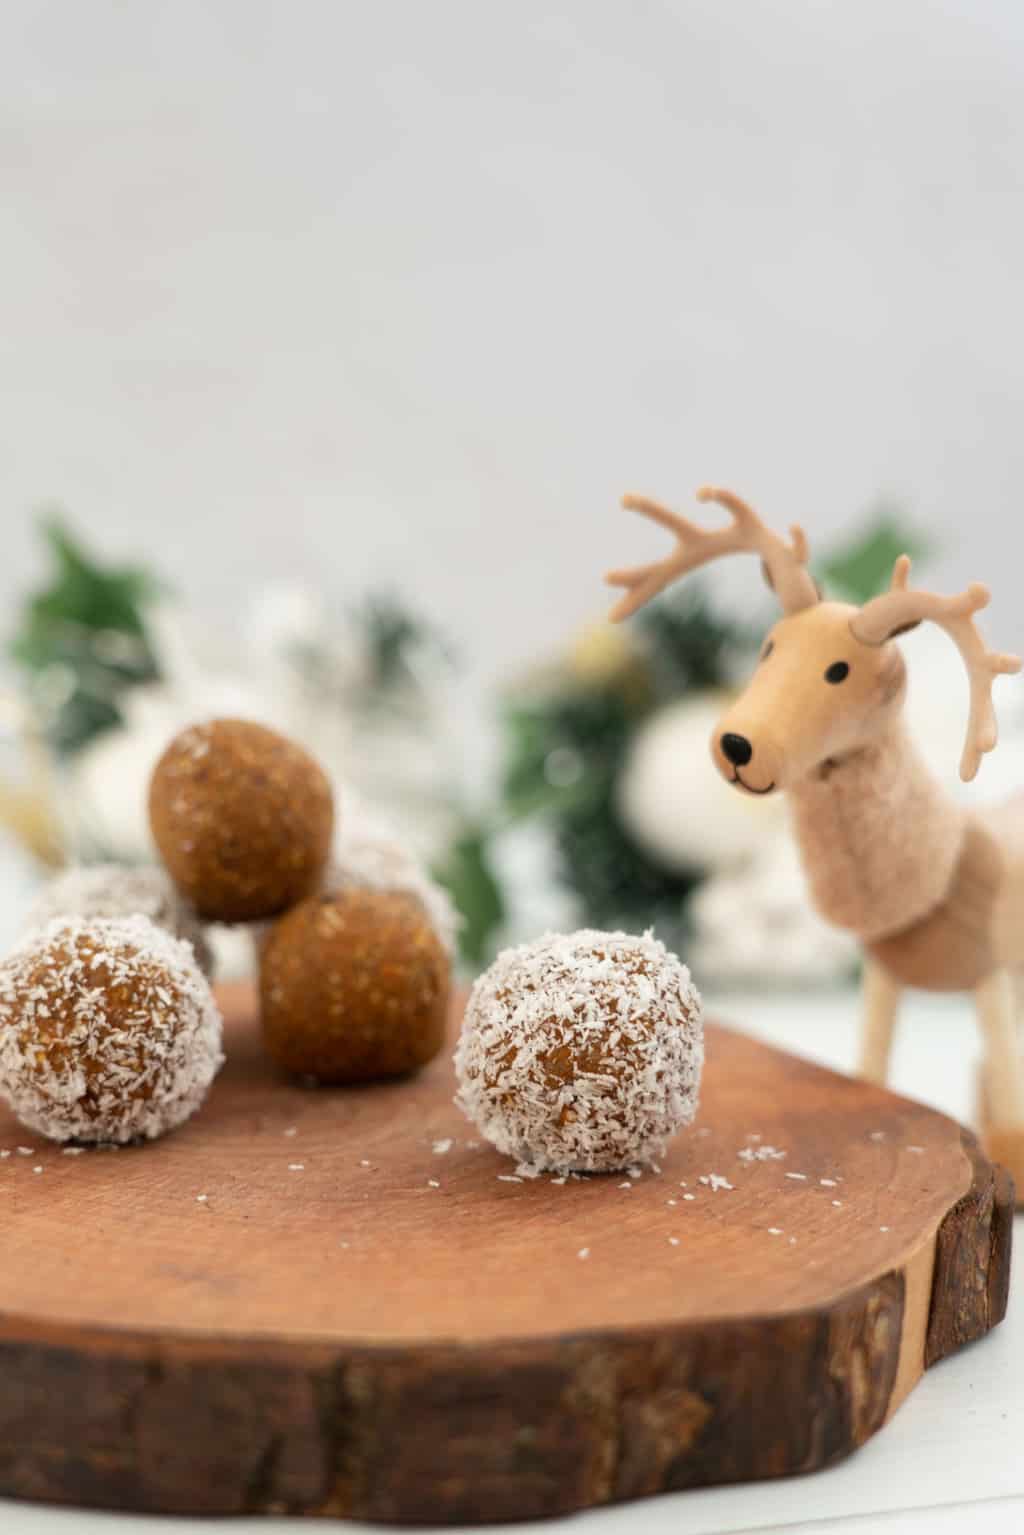 A reindeer toy looking at carrot bliss balls on a wooden block